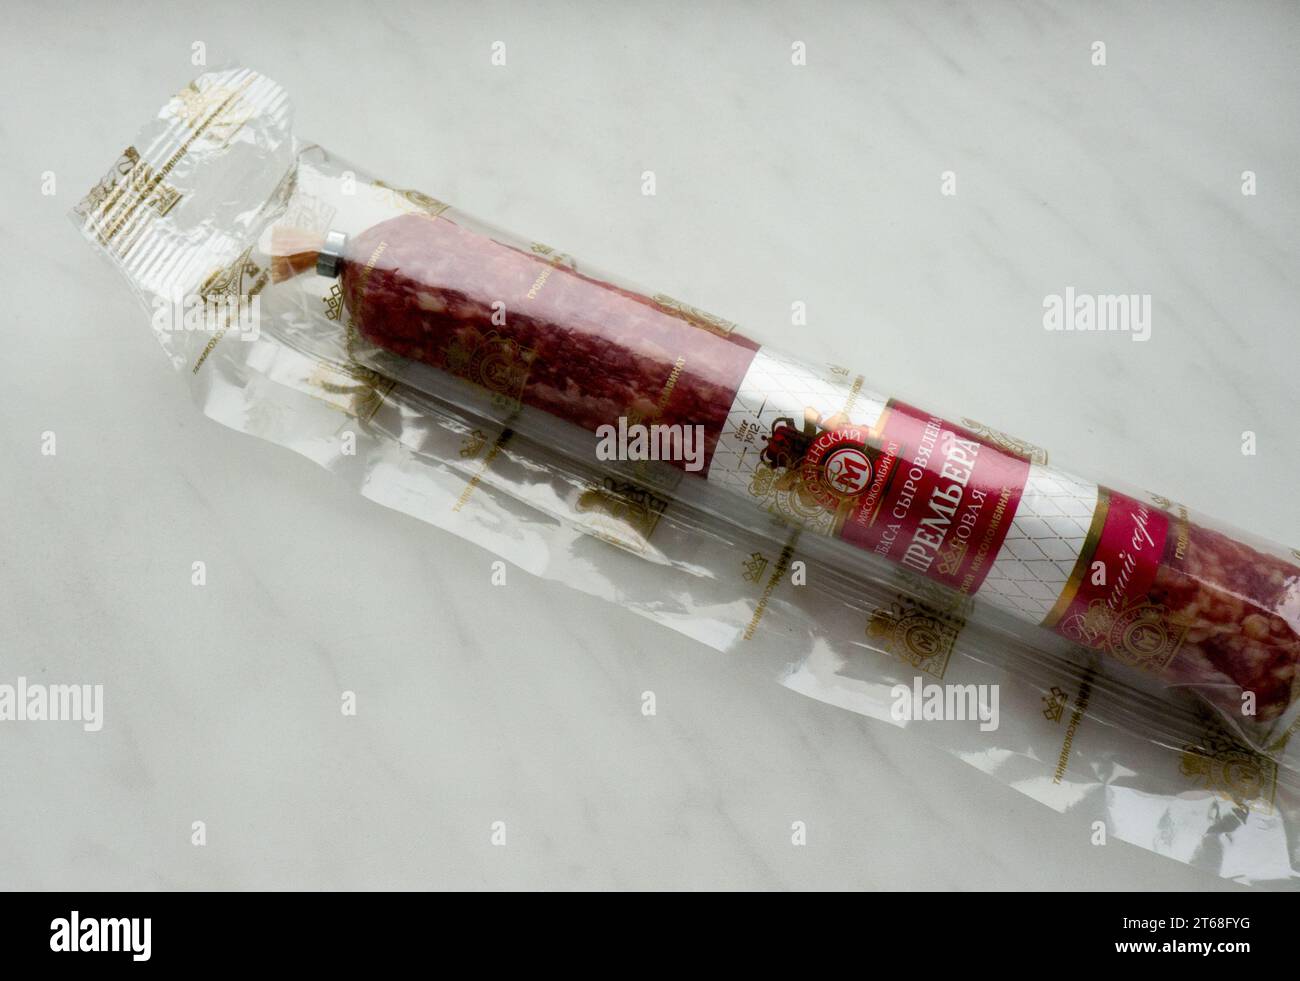 Dried sausage Premiere of the Grodno meat processing plant. Stock Photo